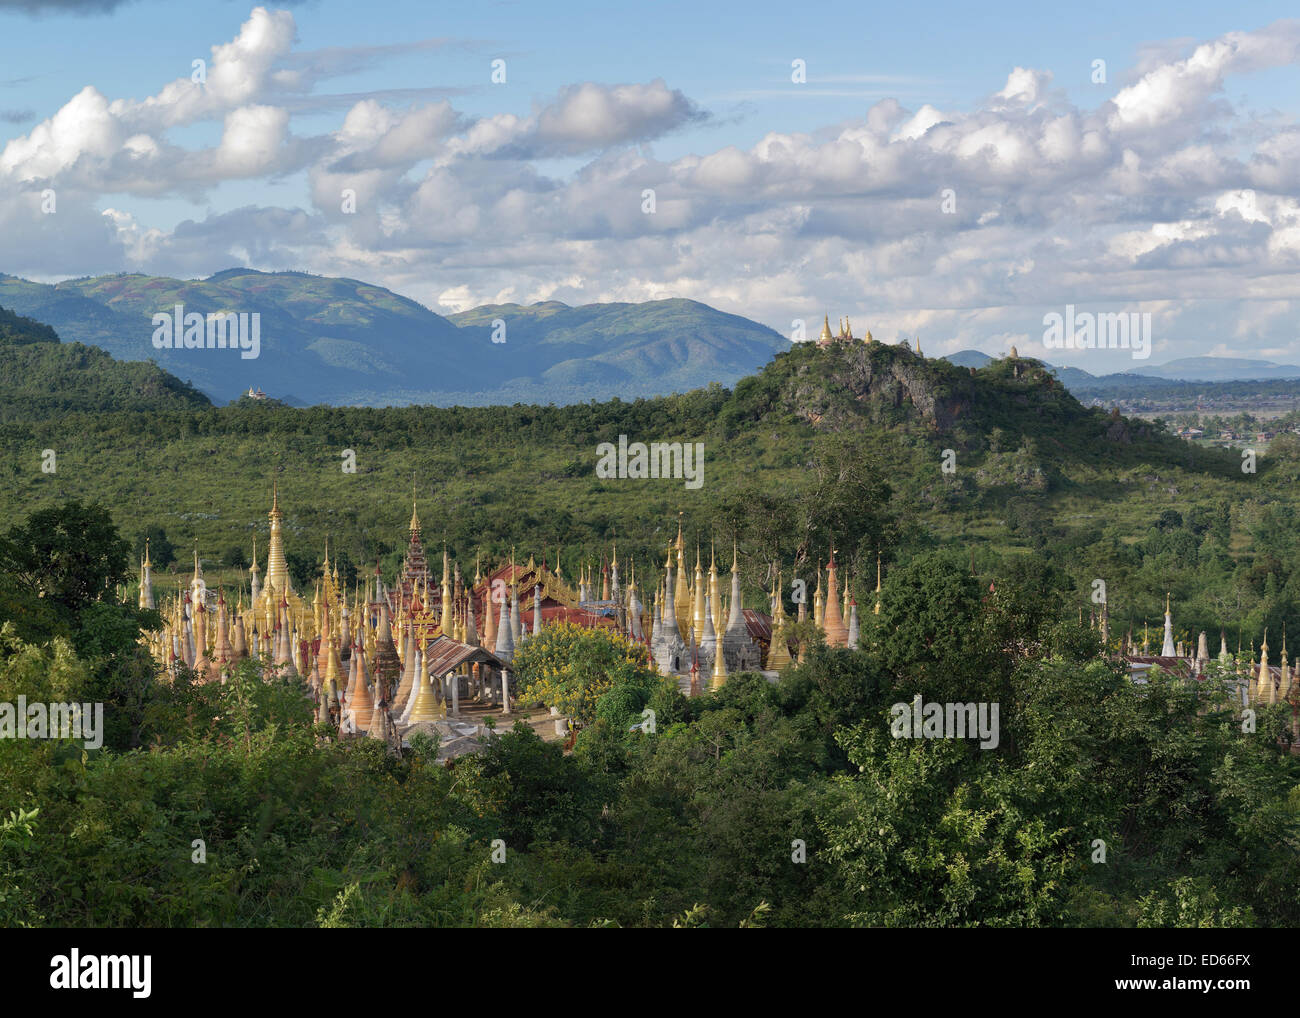 View of the ancient temple in the Himalayan foothills. Stock Photo